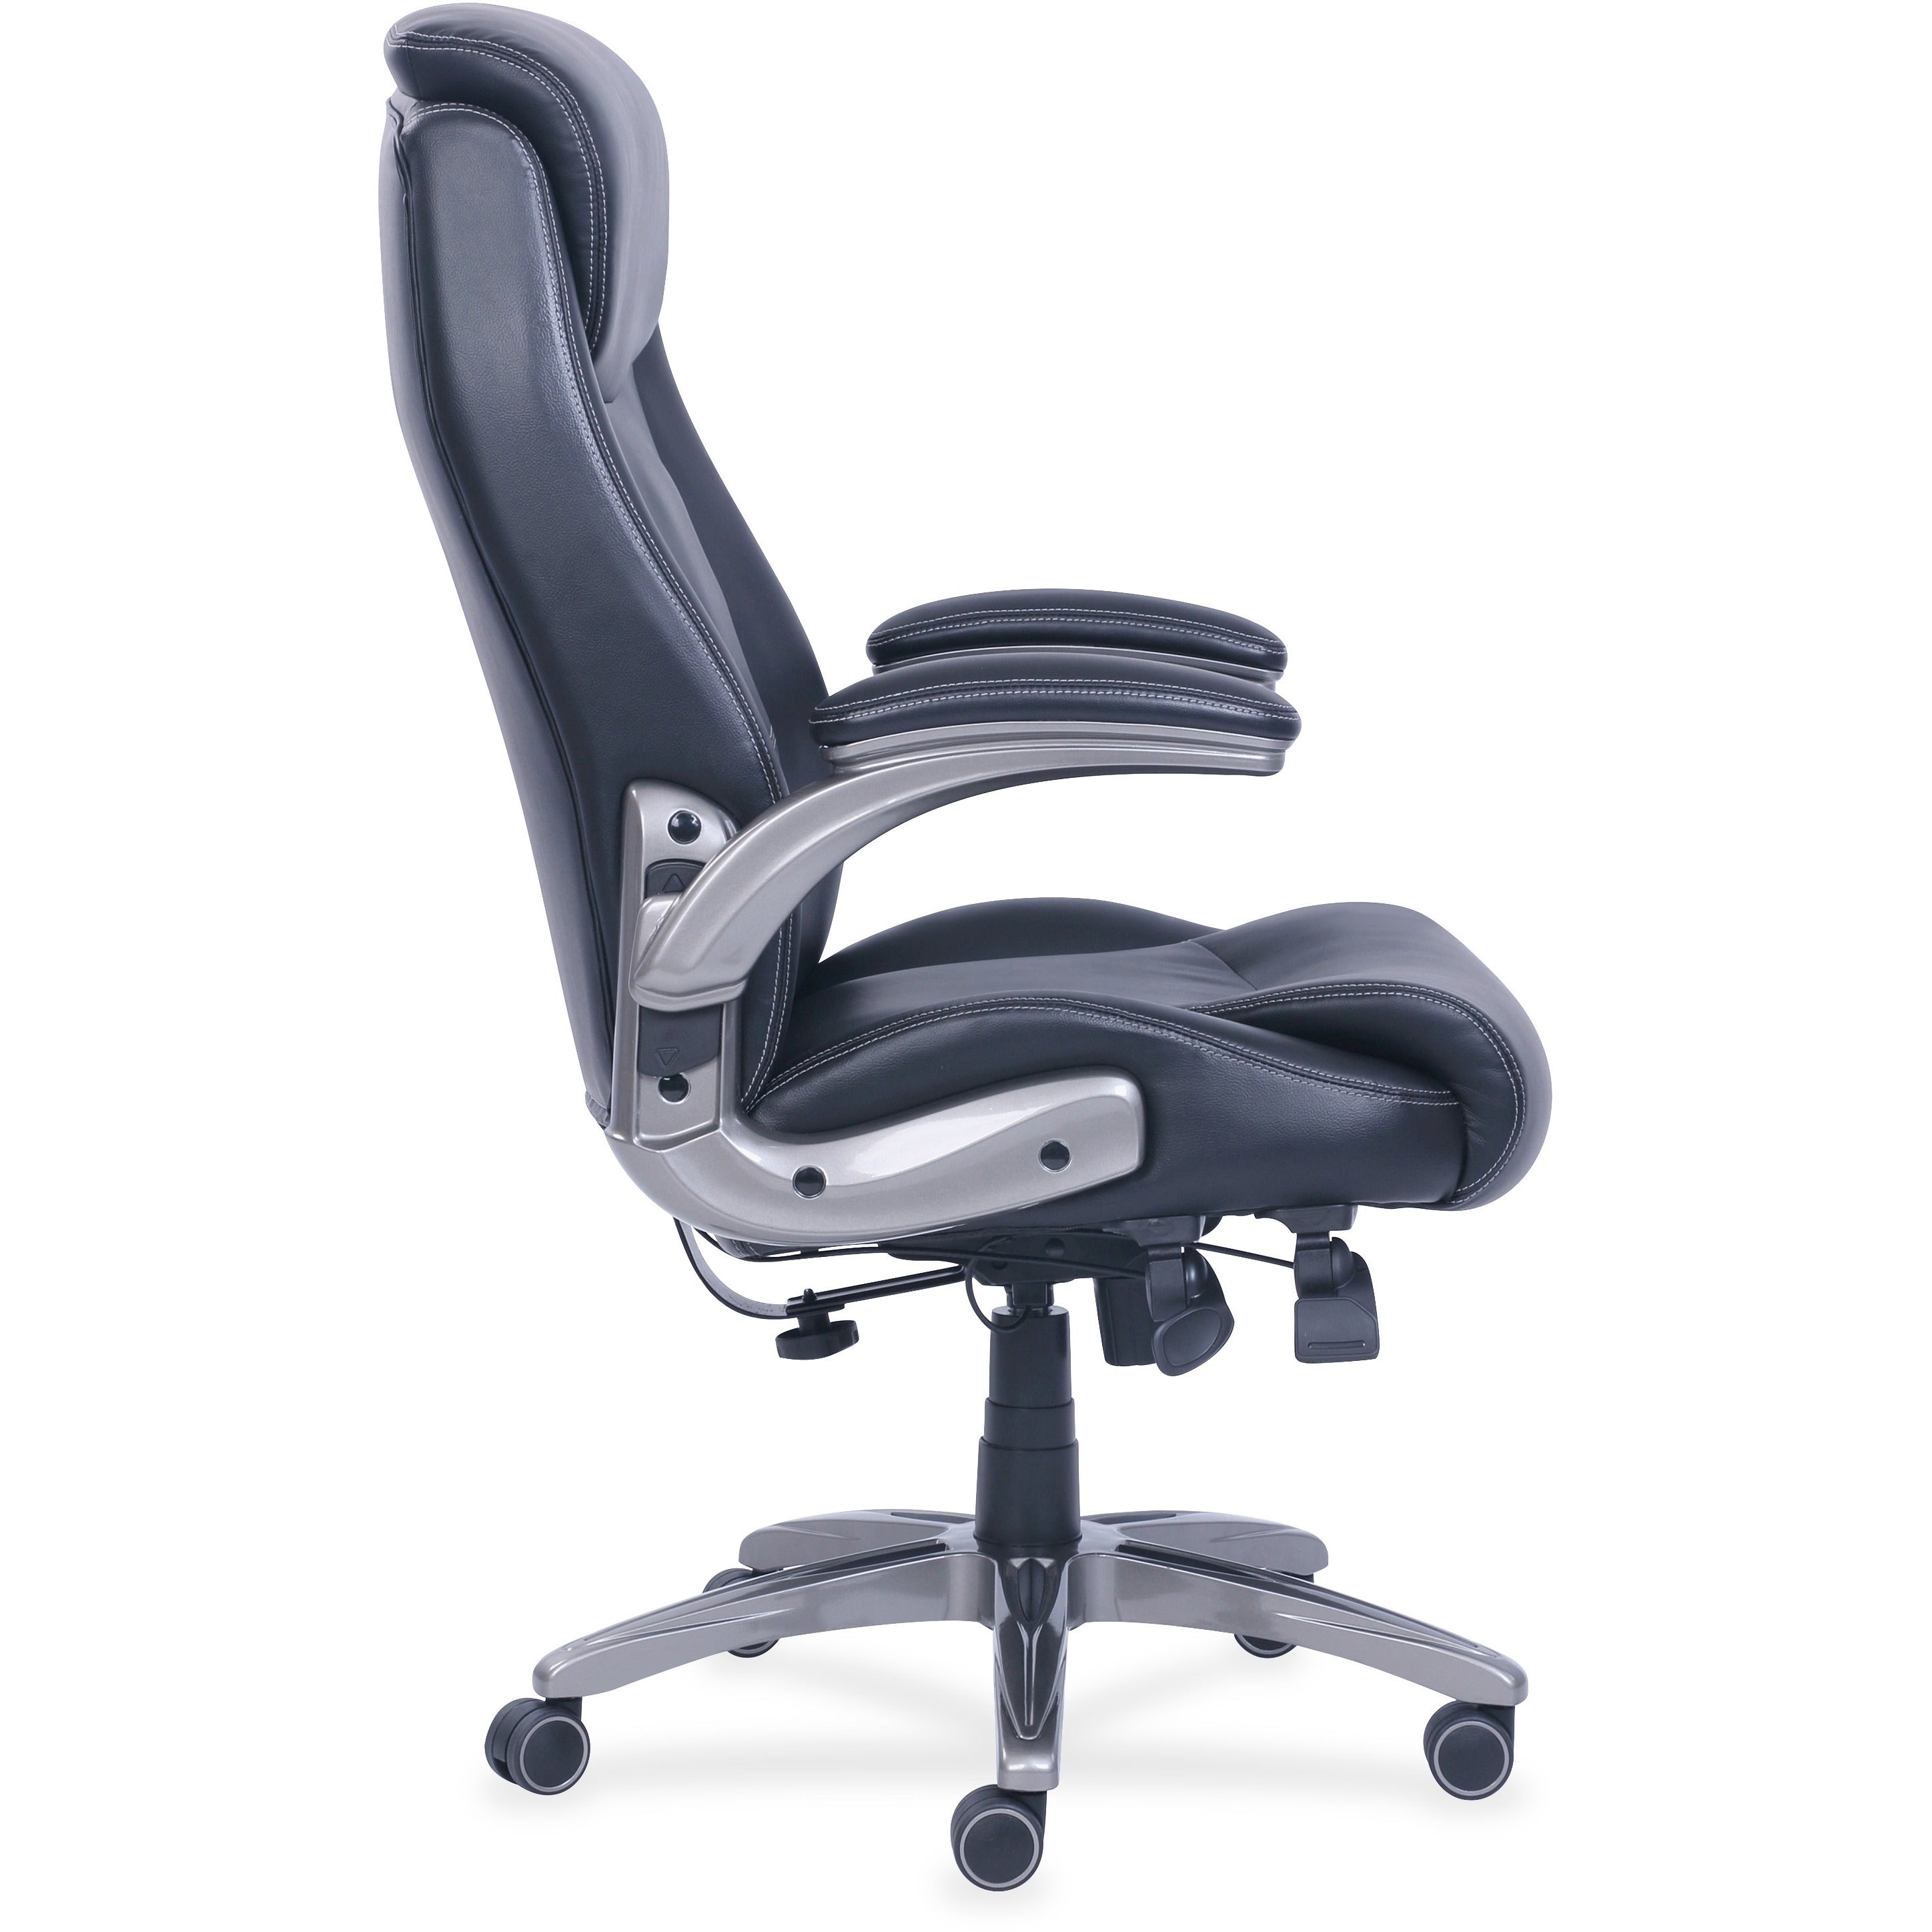 lorell-wellness-by-design-revive-executive-office-chair-black-bonded-leather-seat-black-bonded-leather-back-5-star-base-1-each_llr48730 - 5